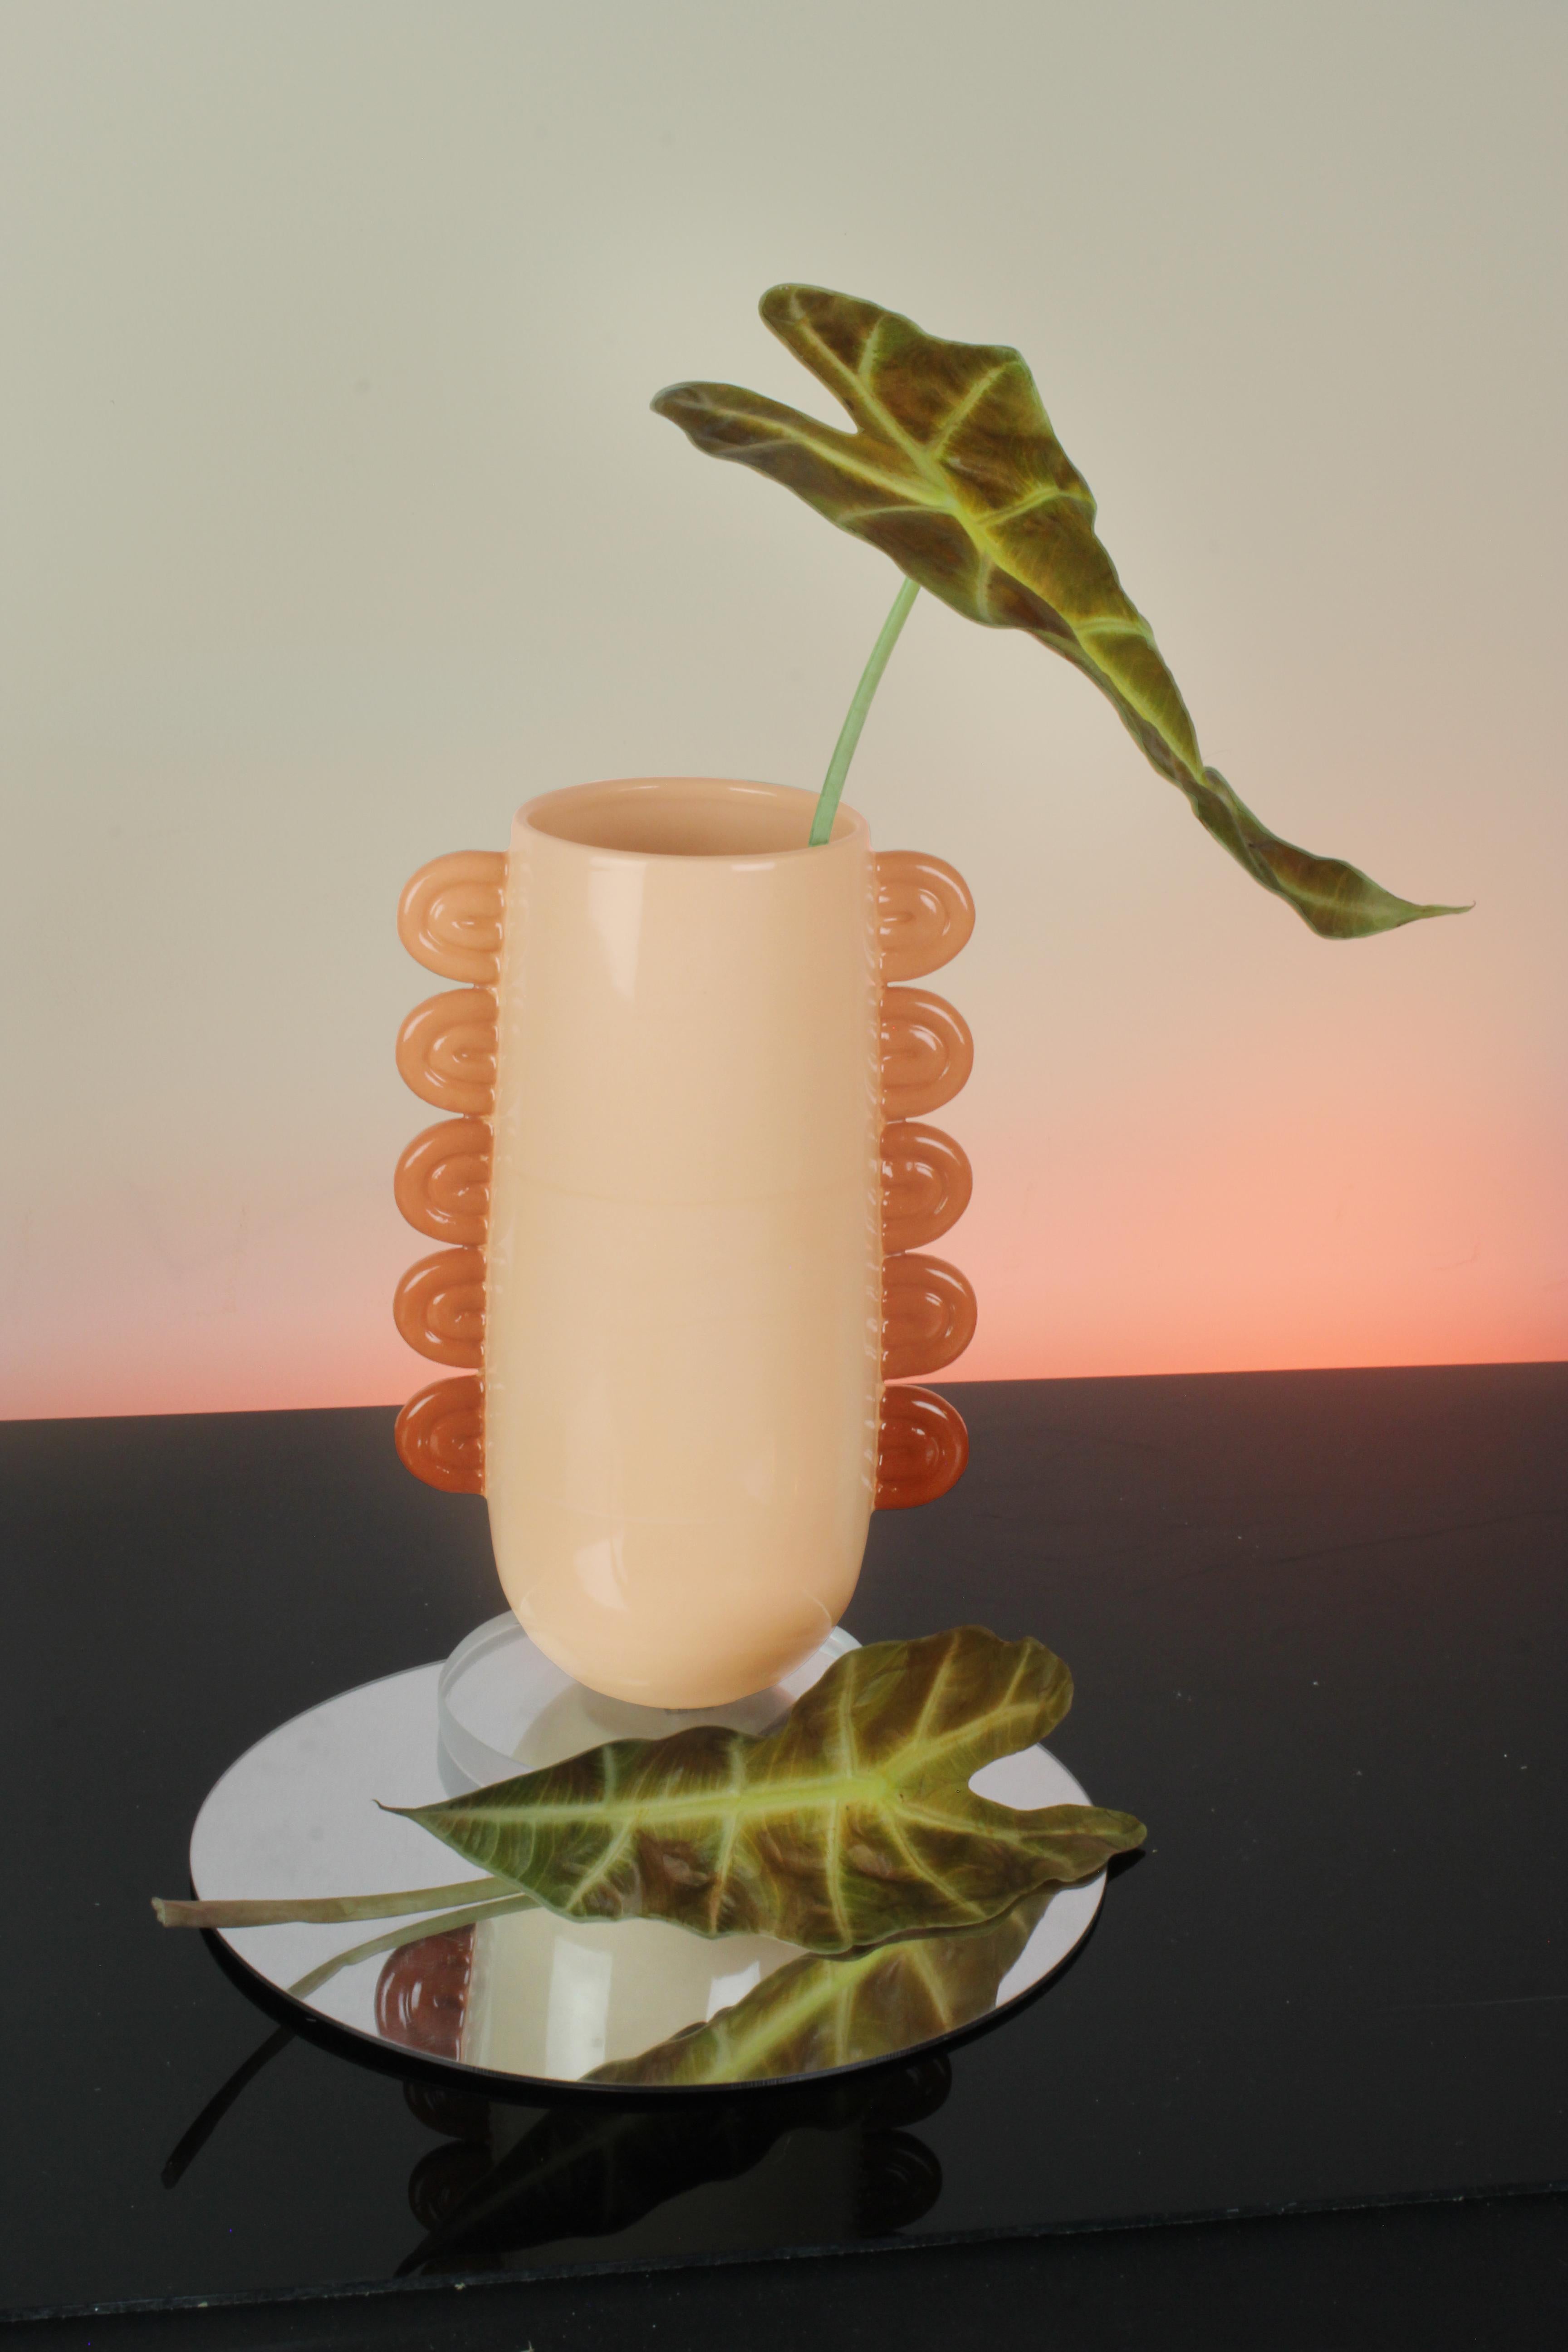 Handmade ceramic vase. Made with custom tinted clay in a gradient of sienna and peach, covered with a clear, glossy glaze. Handmade by Malka Dina in Brooklyn, NY.
Due to the handmade nature of this item, each piece will be slightly unique and some